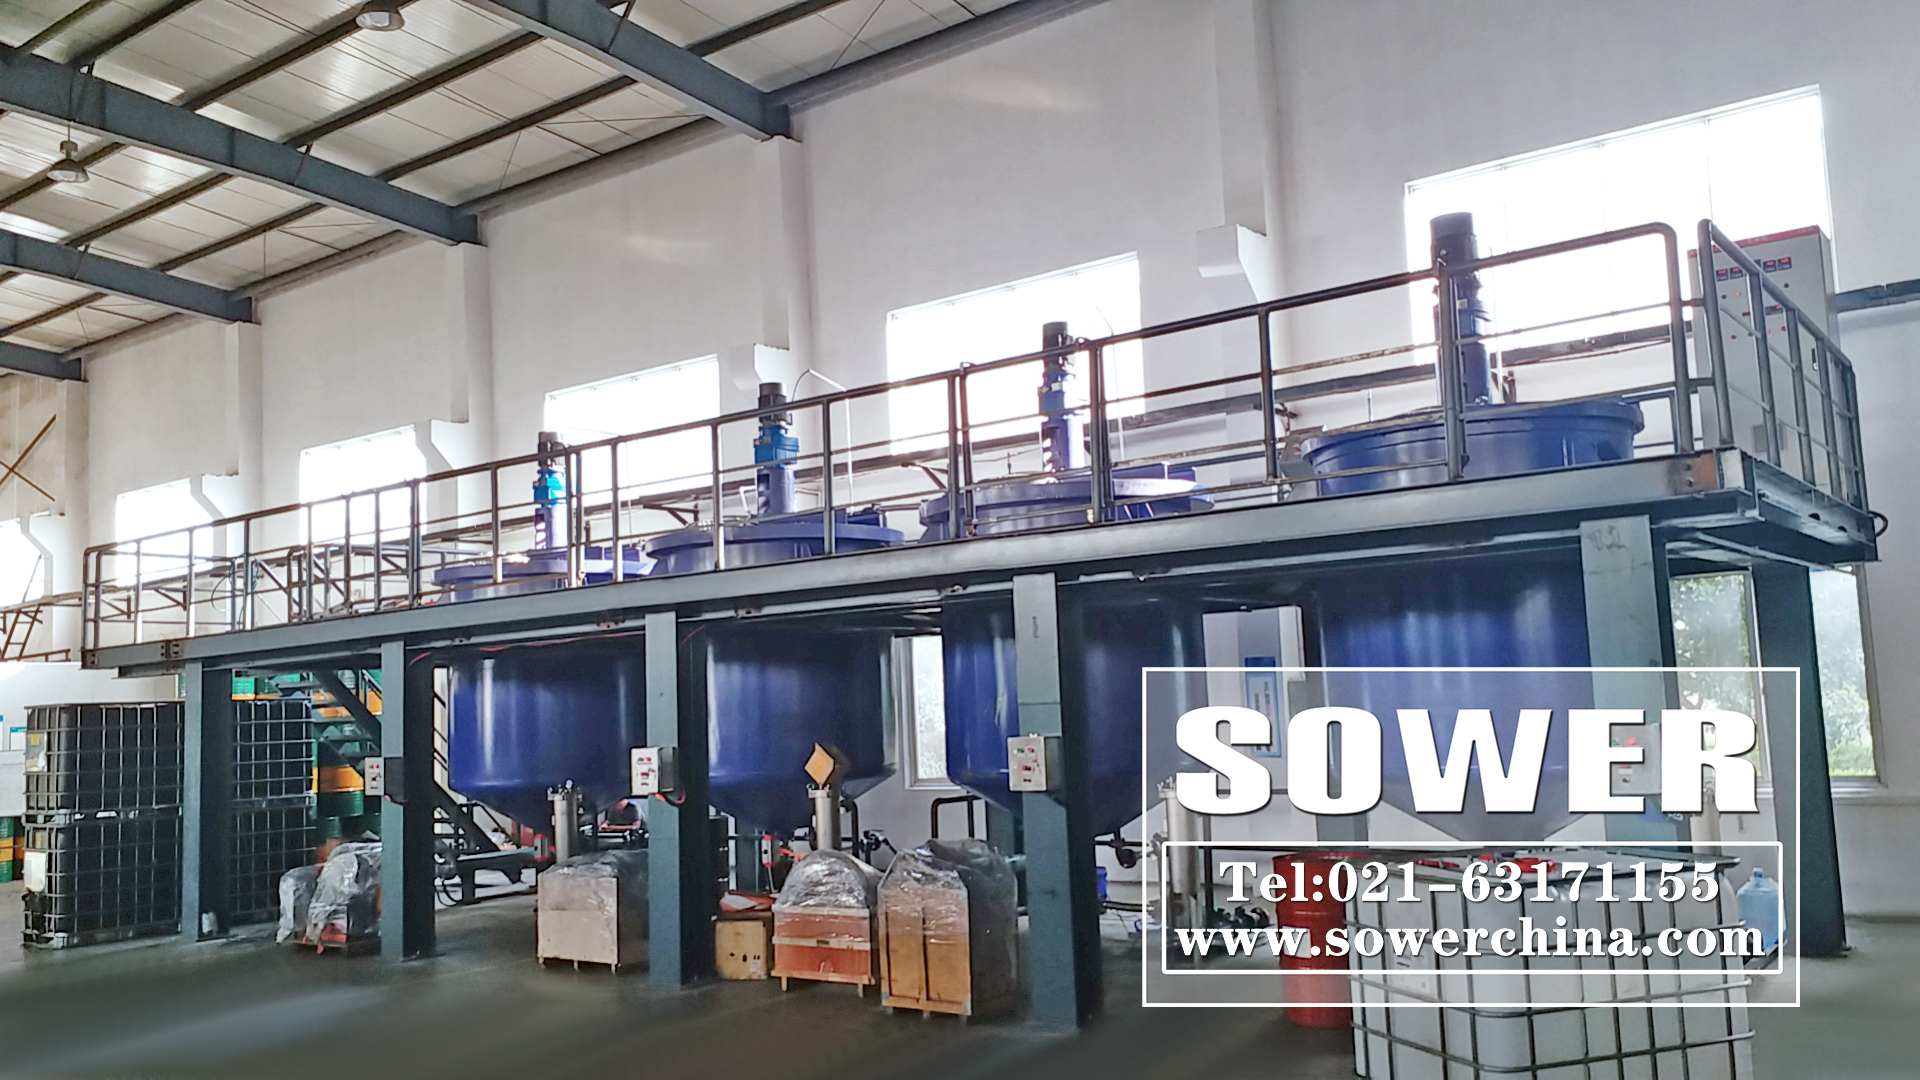 The lubricating oil project in charge of sower was put into operation smoothly